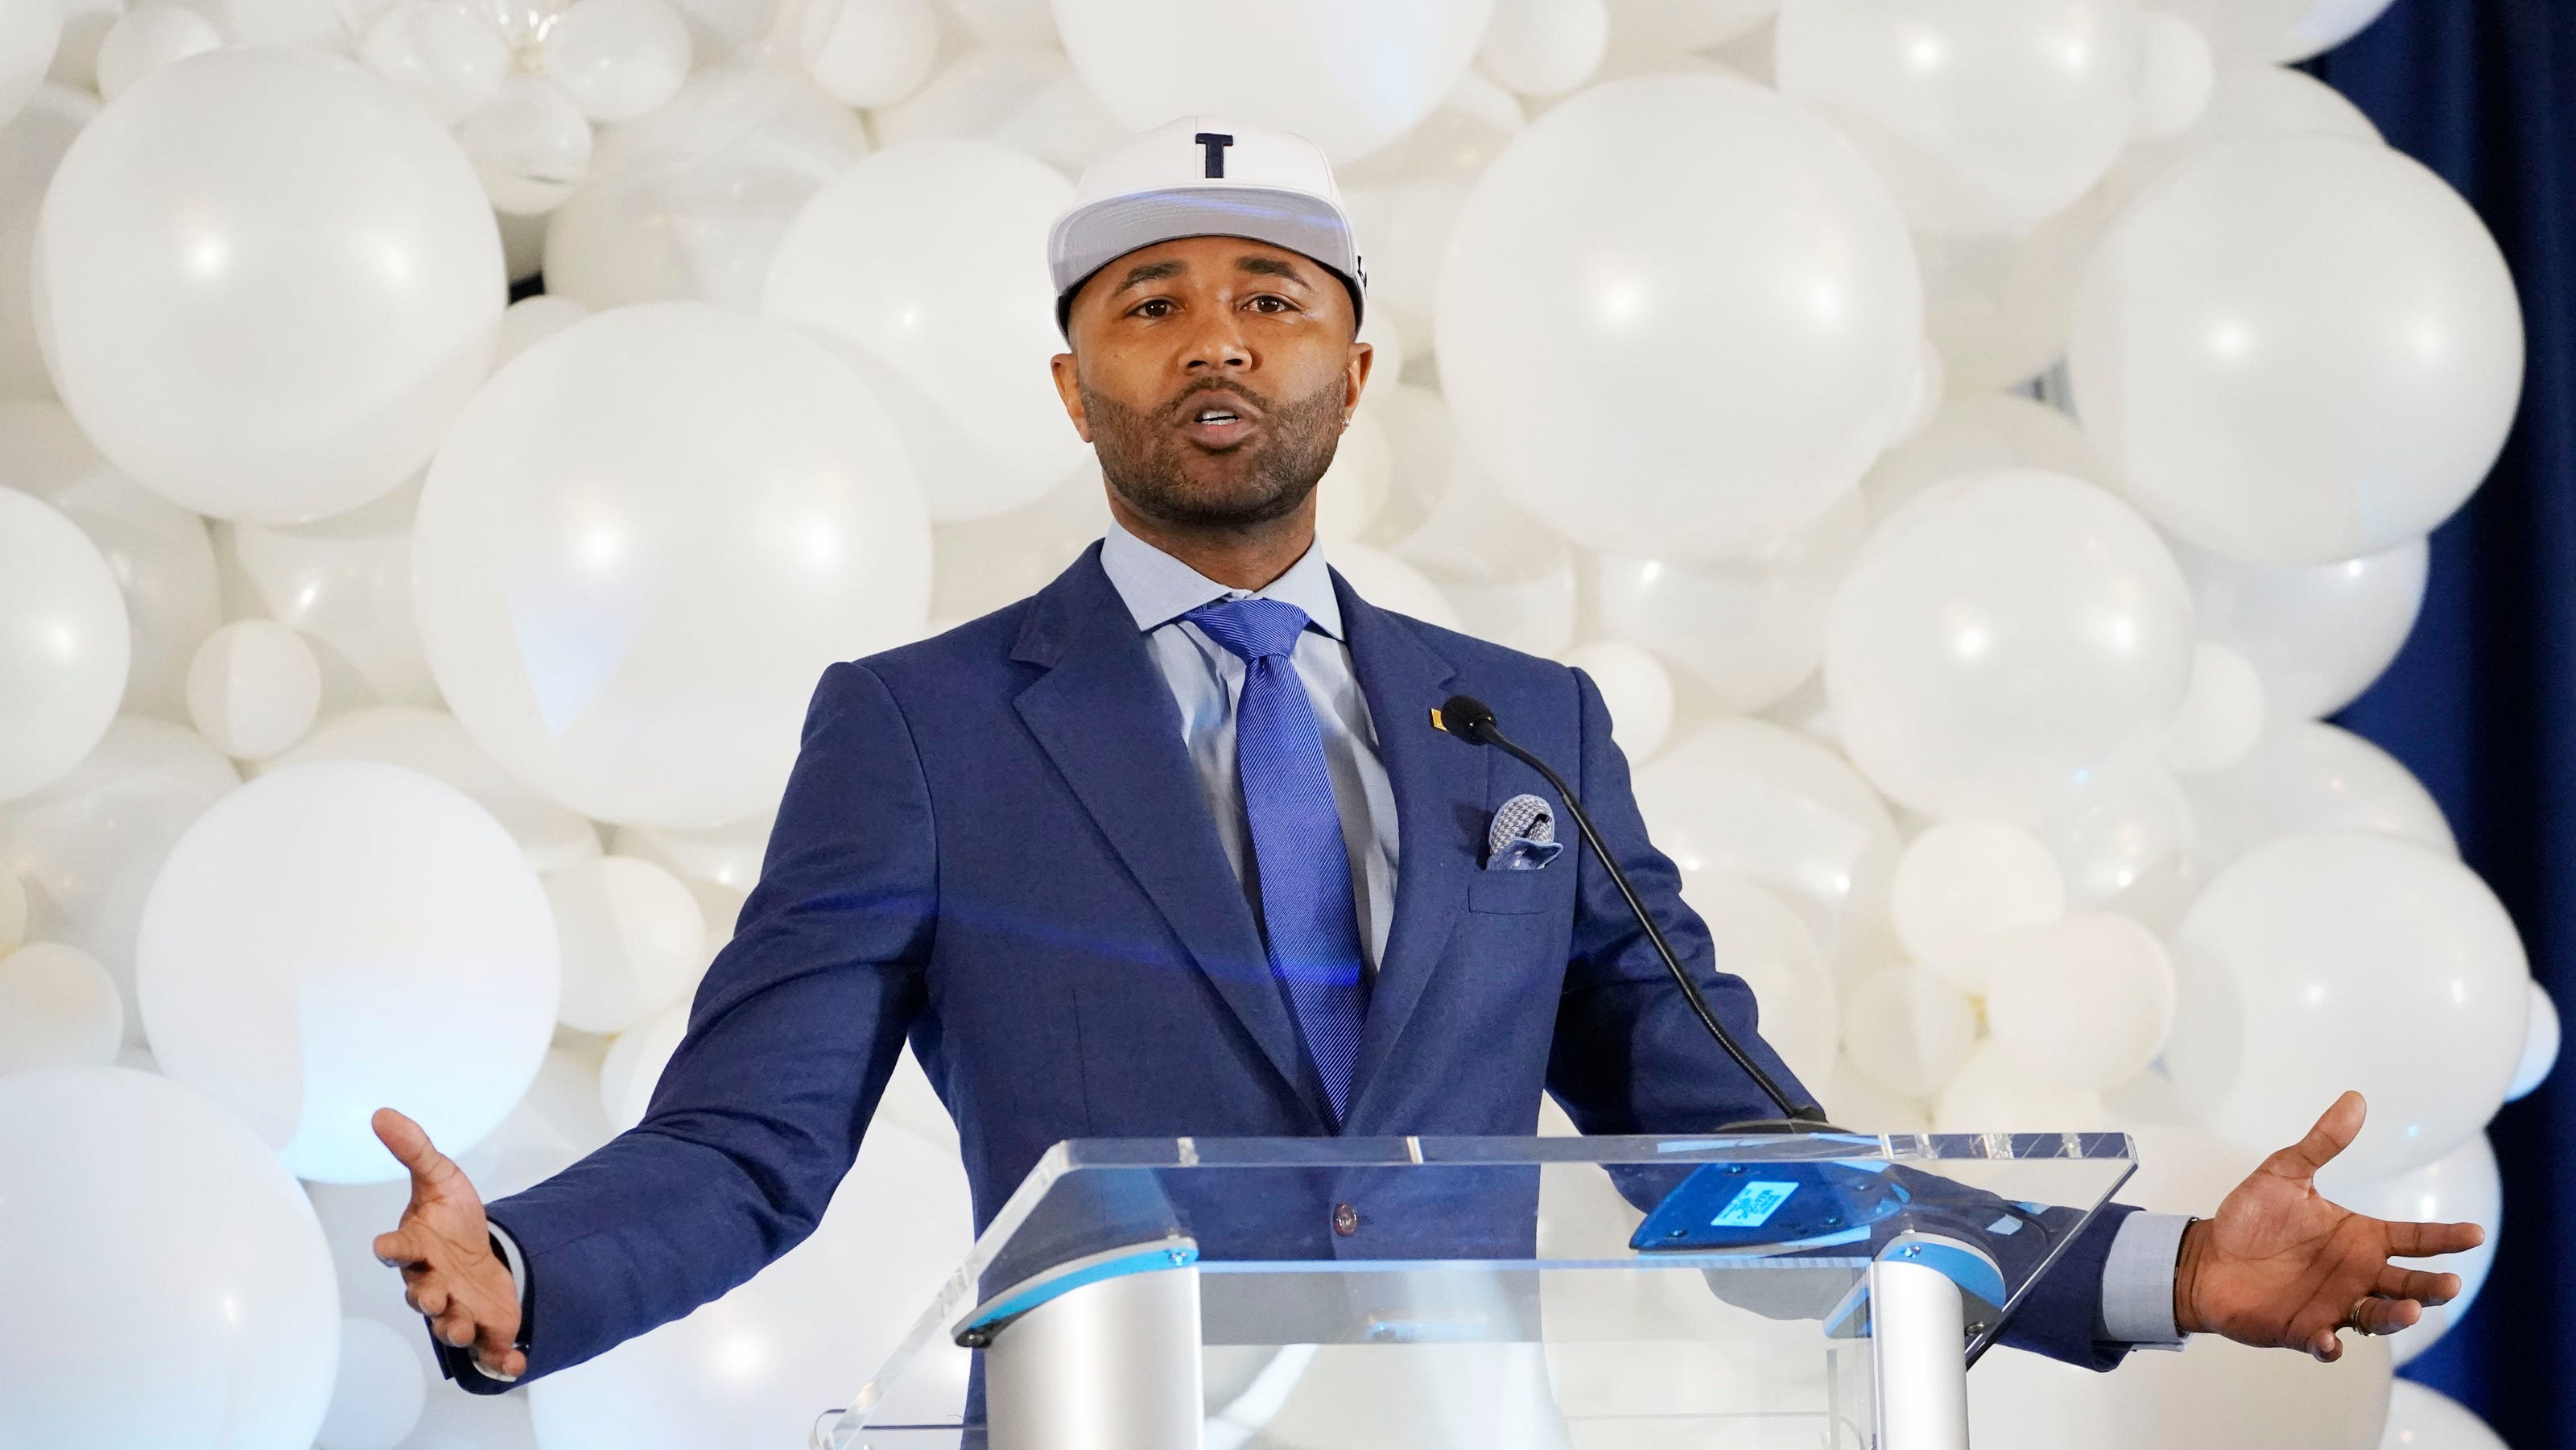 Mindset' is the theme for Jackson State basketball coach Mo Williams